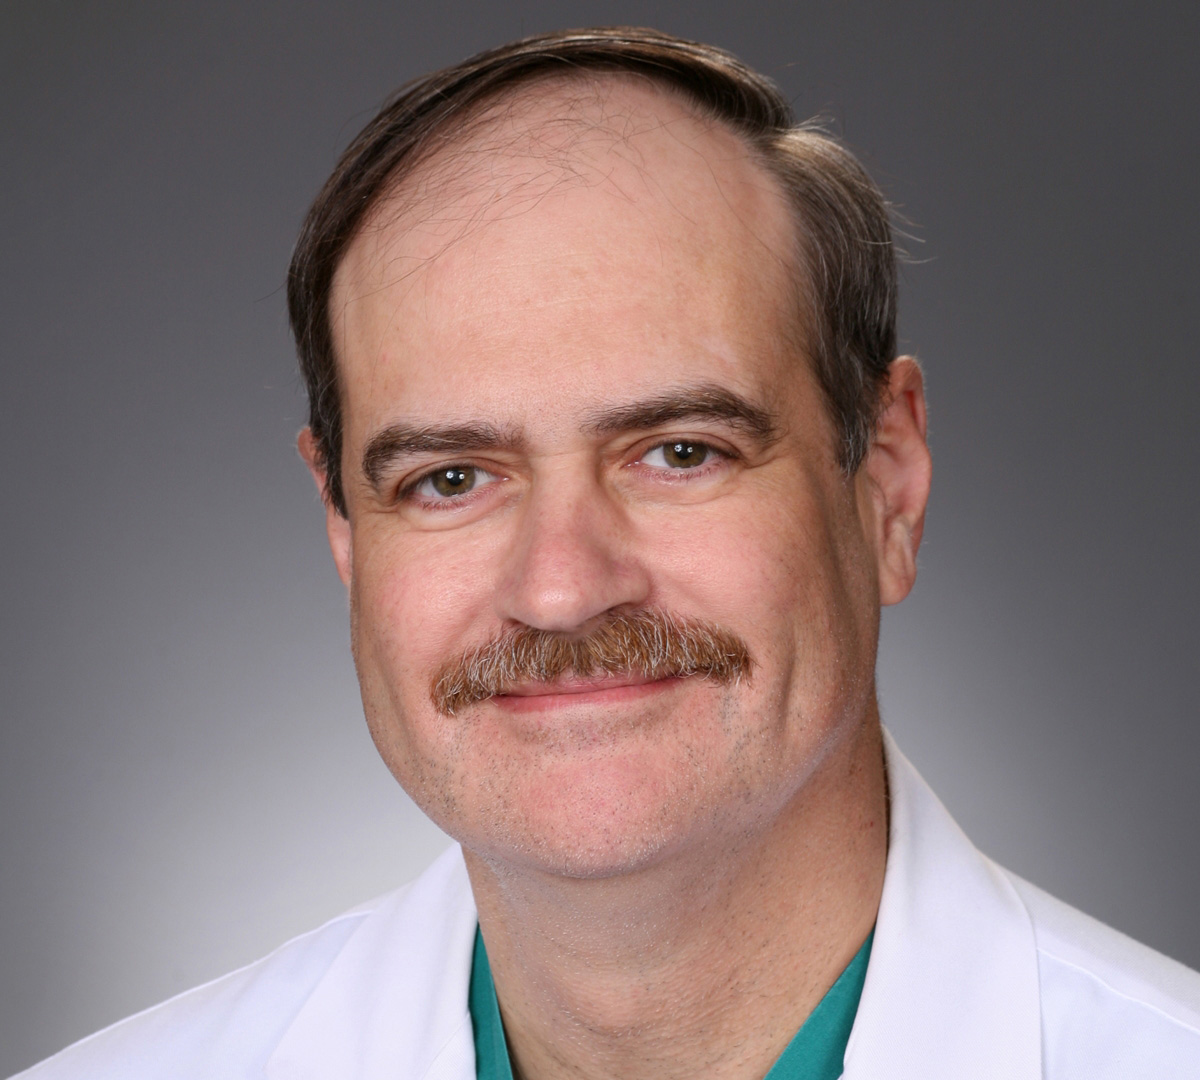 Dr. Michael A. Hollifield